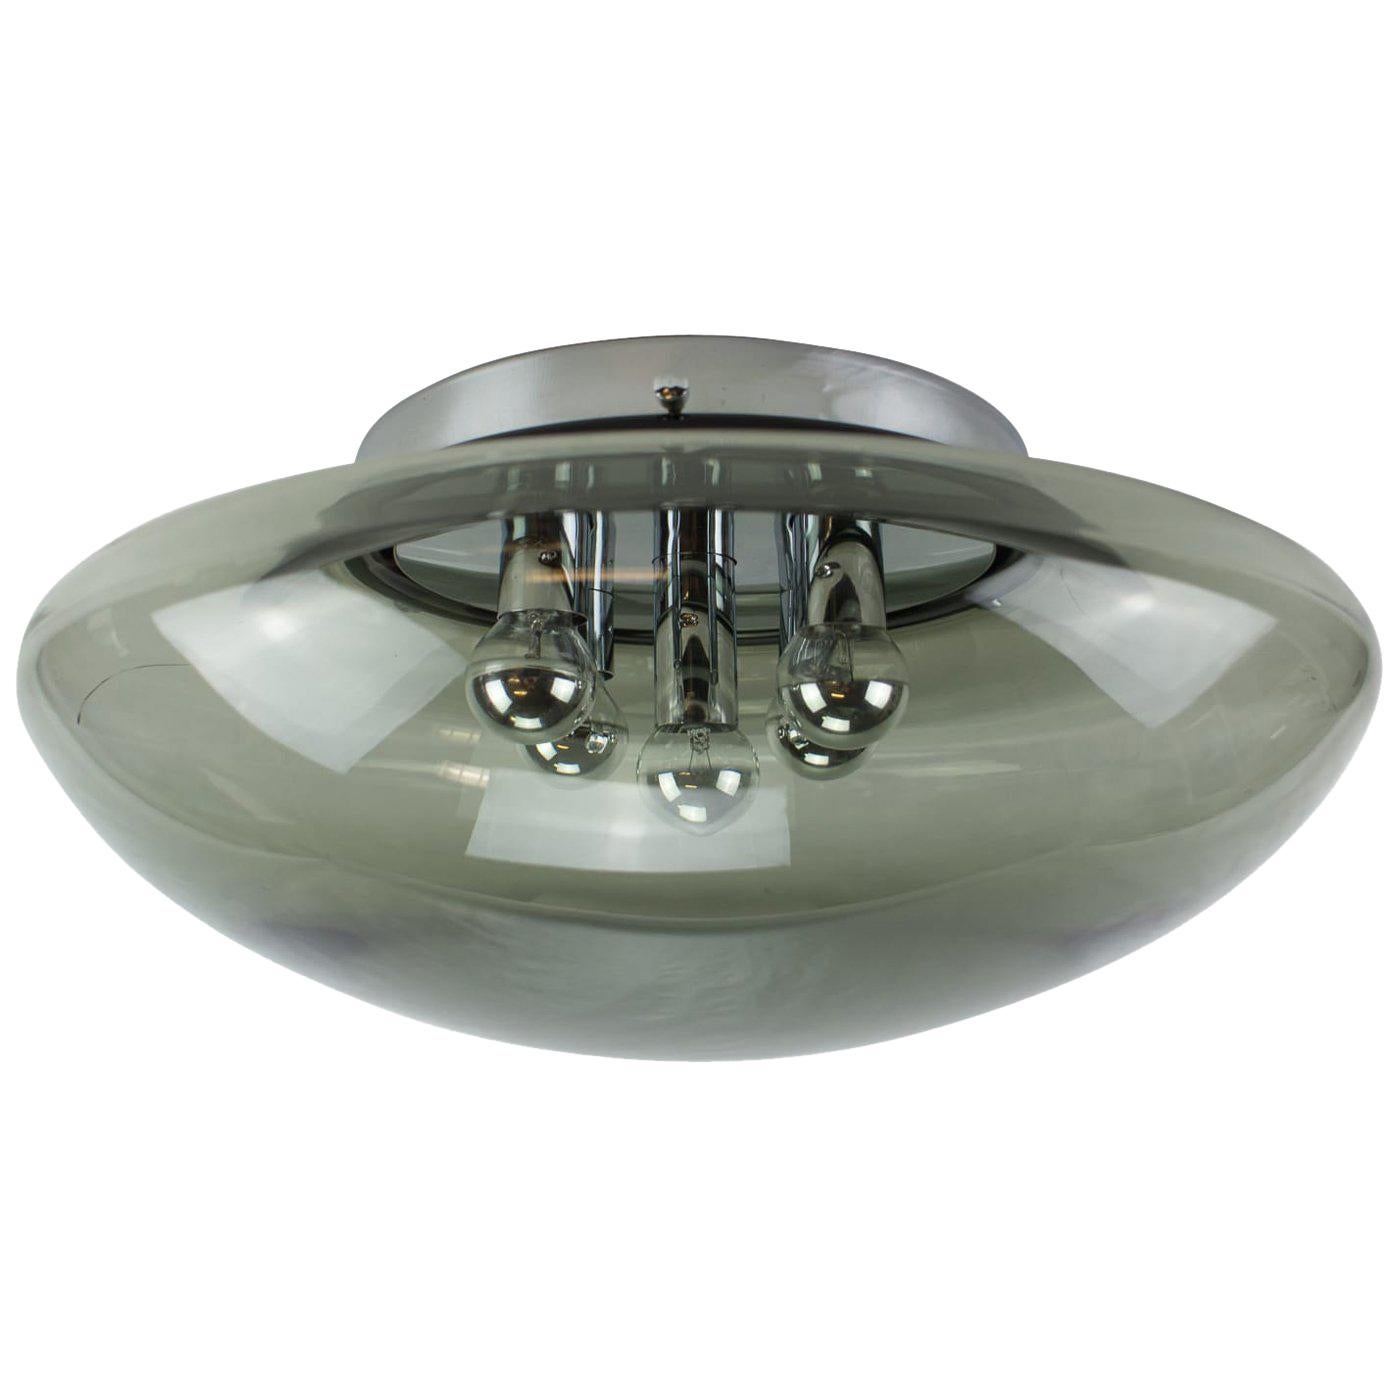 Huge Vintage Smoked Glass and Chrome Wall Light from Hilldebrand, Germany, 1960s For Sale